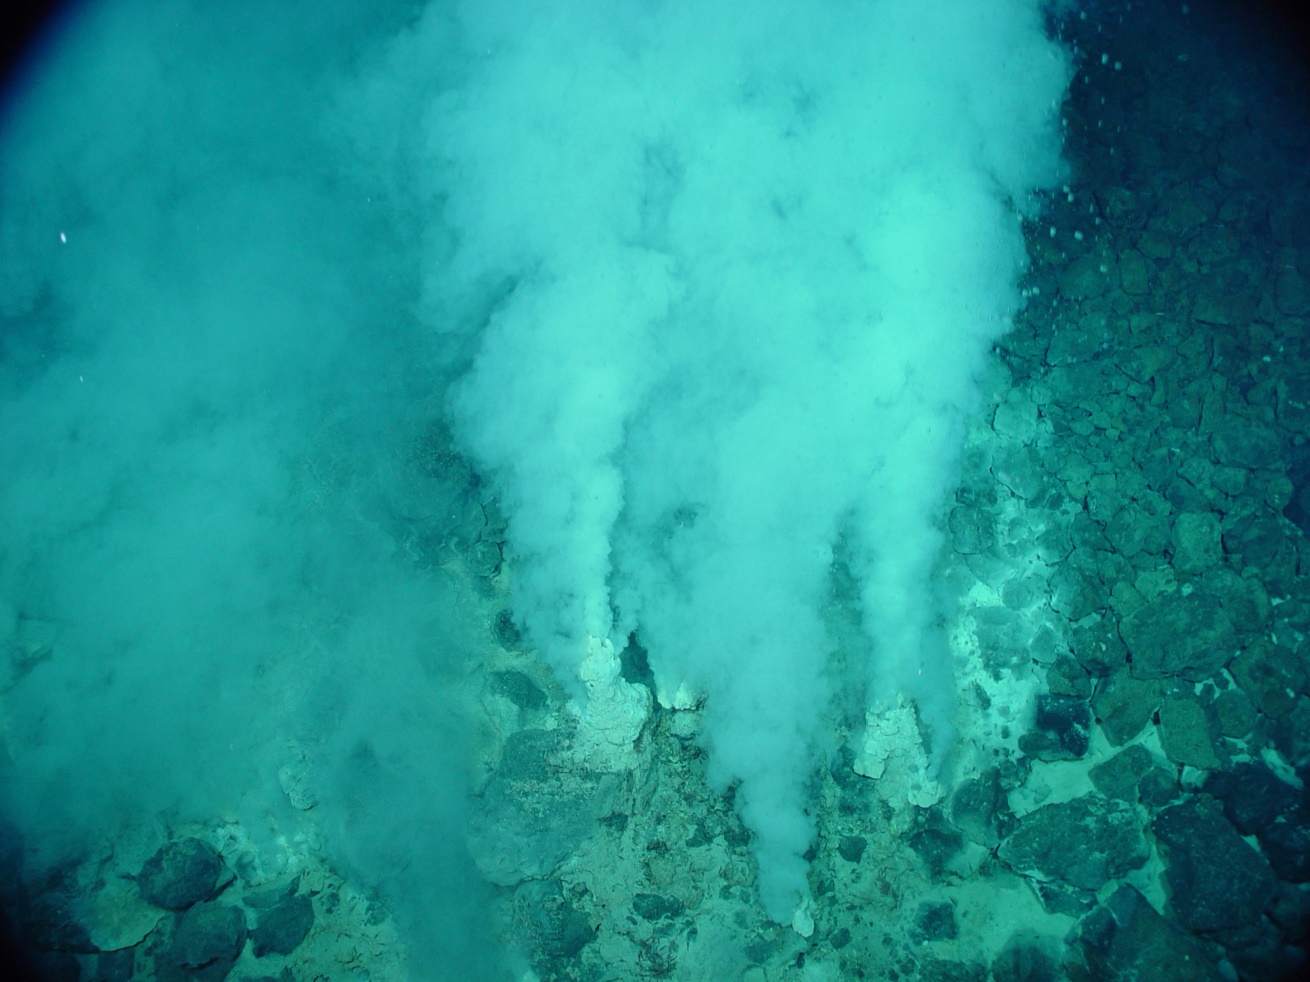 Hydrothermal vents imaged by the U.S. National Oceanic and Atmospheric Administration